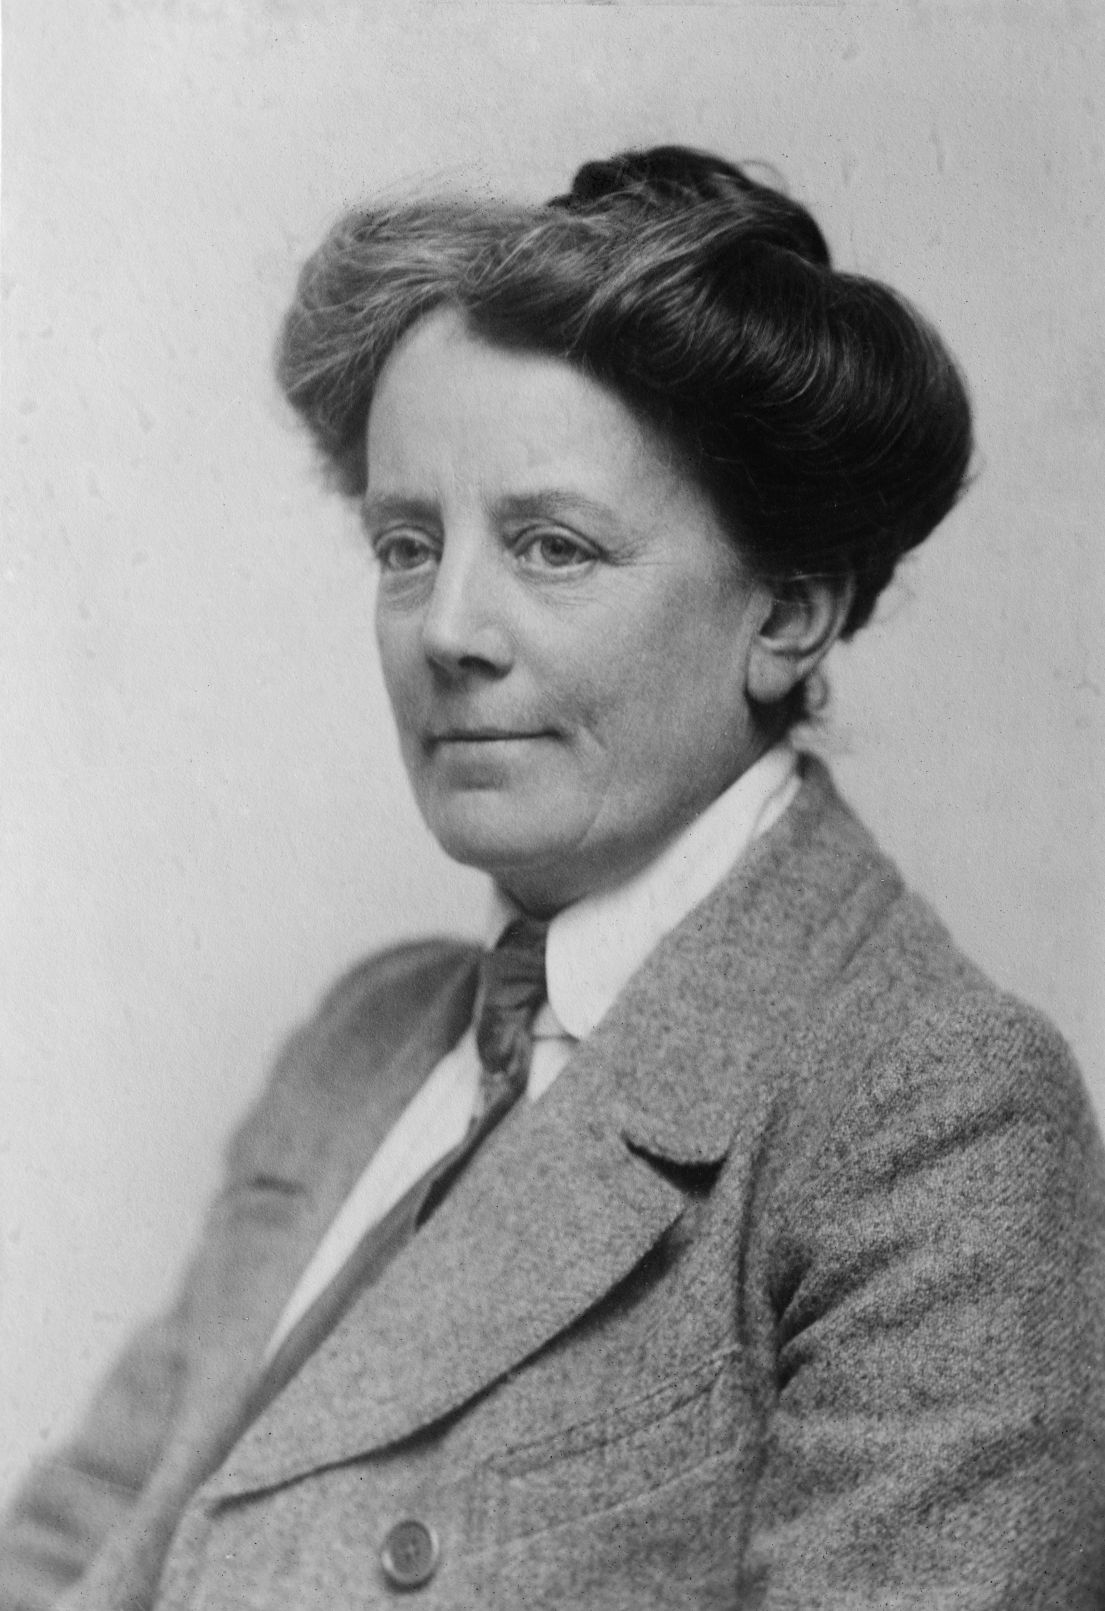 A black and white headshot of a women. Her long hair tied up into a bun, she wears a tidy suit jacket.